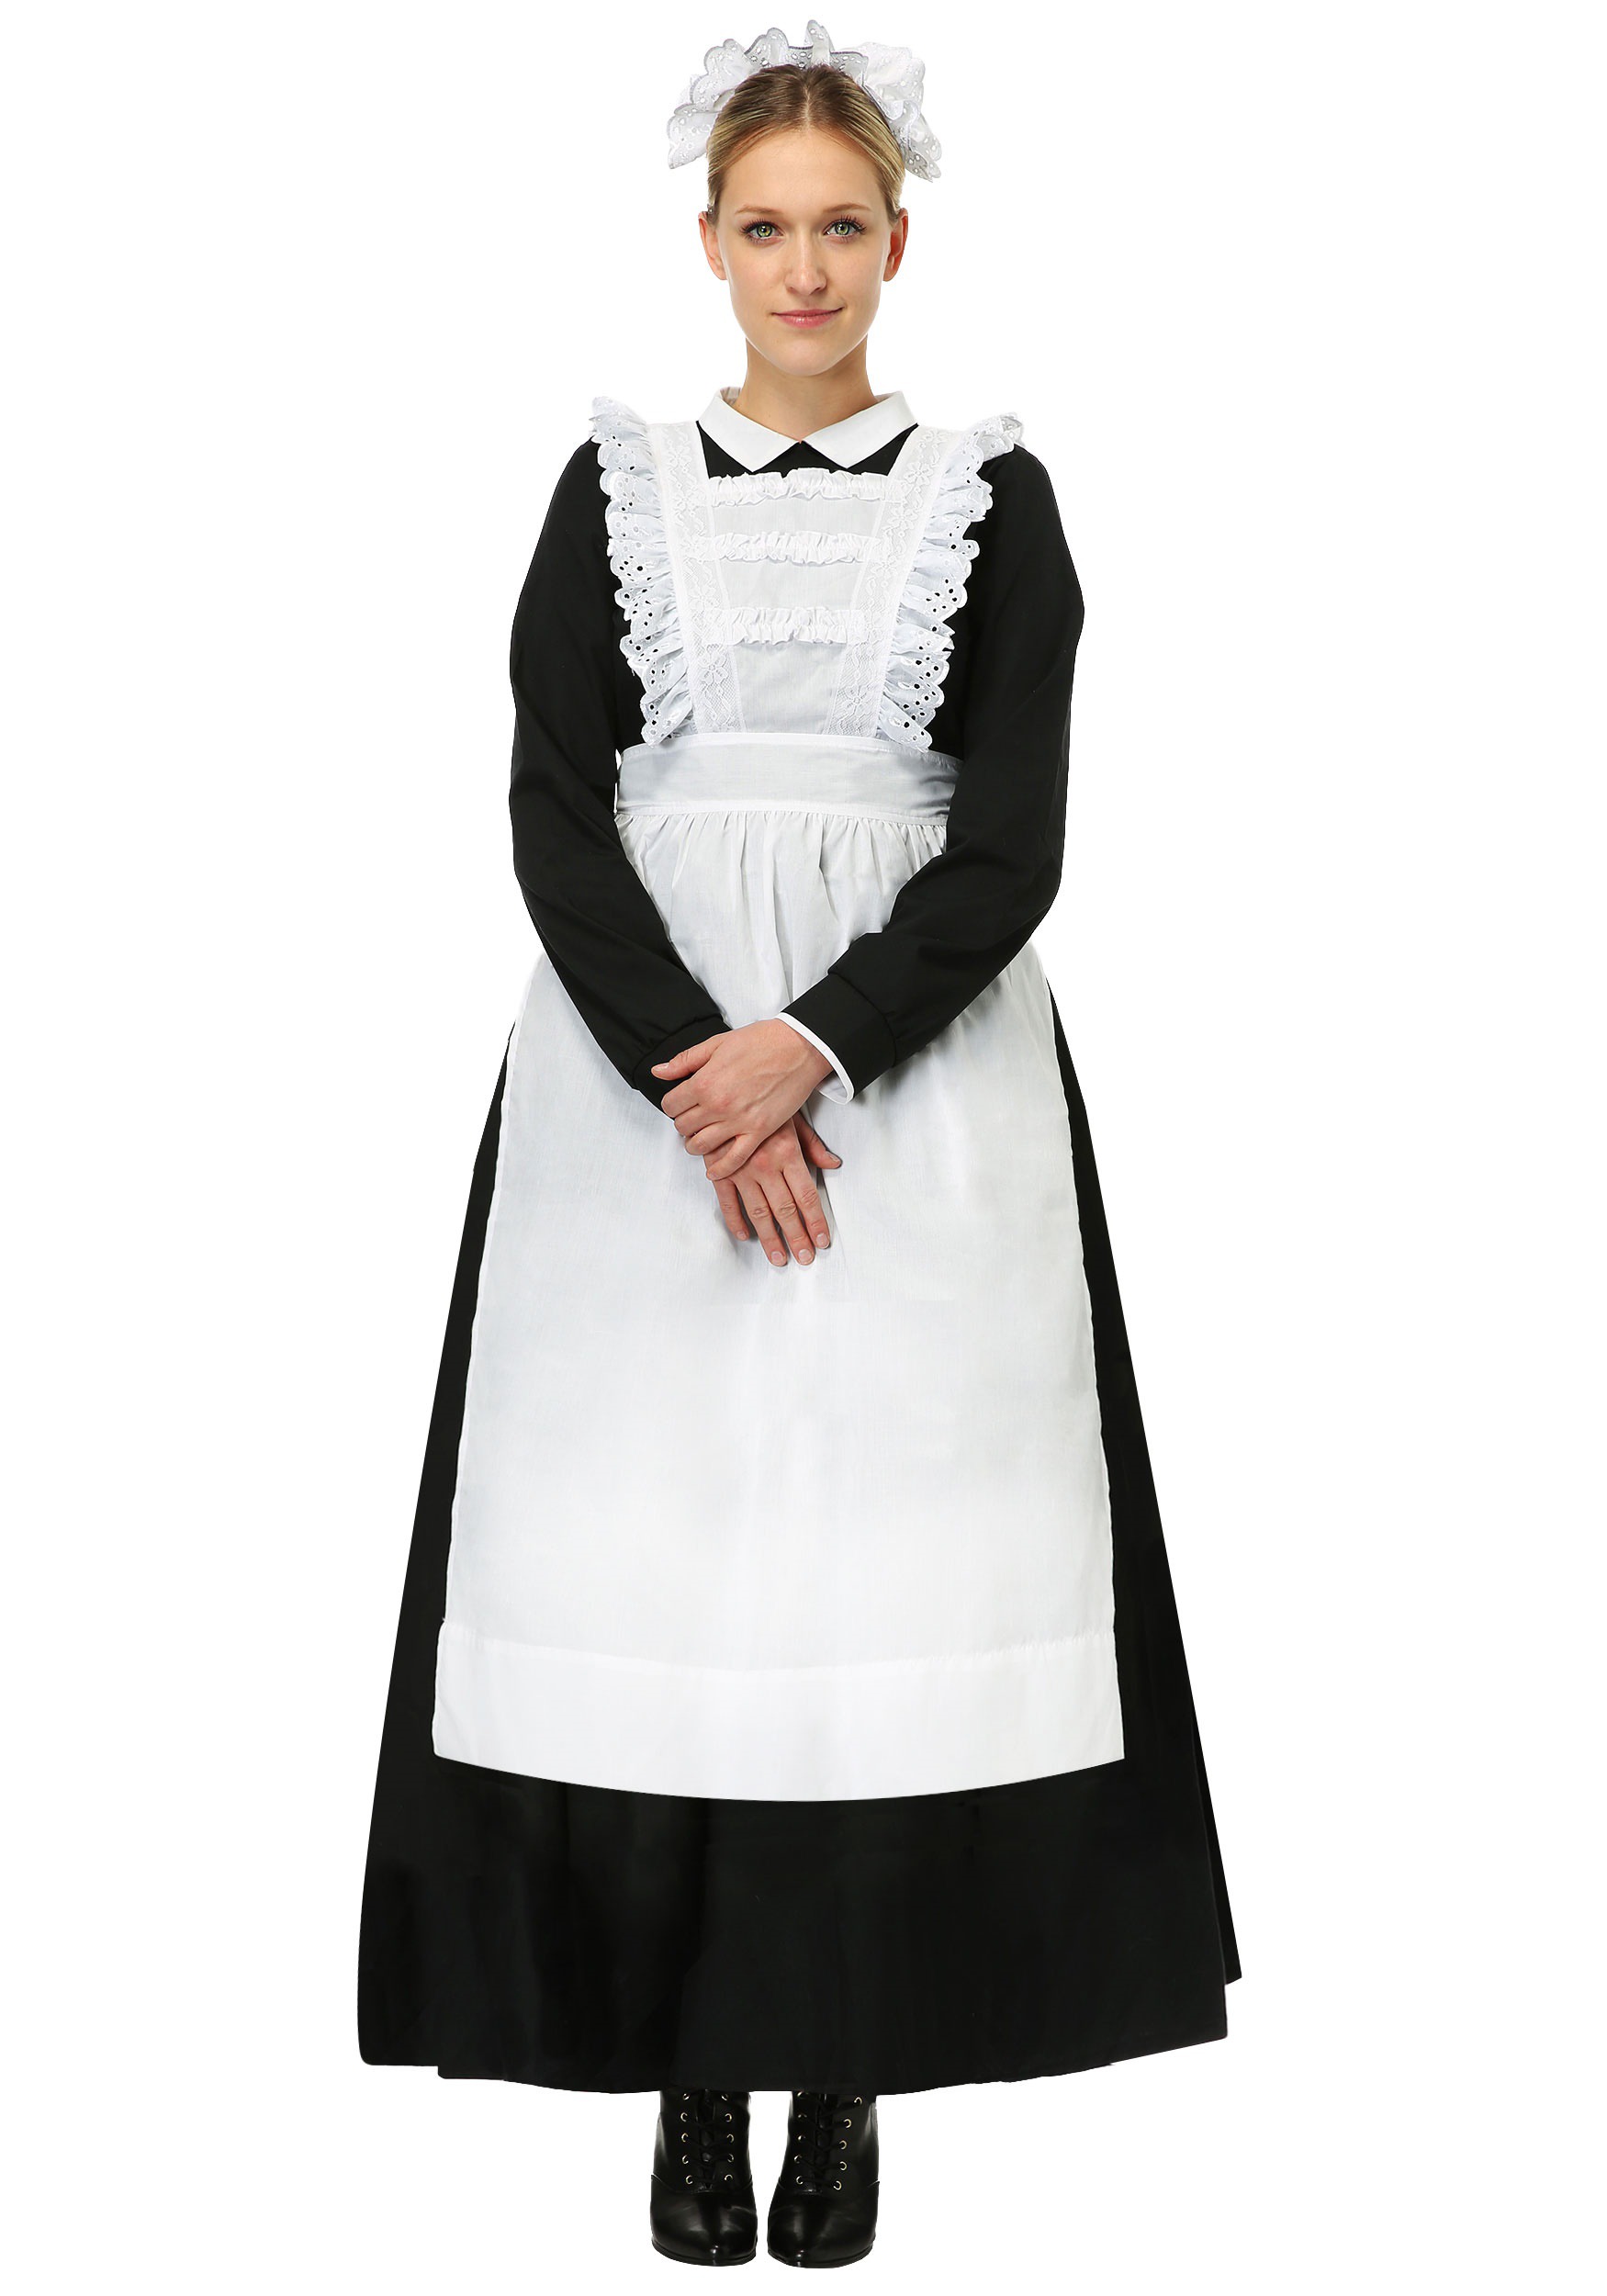 Image of Traditional Maid Costume for Women ID FUN1520AD-M